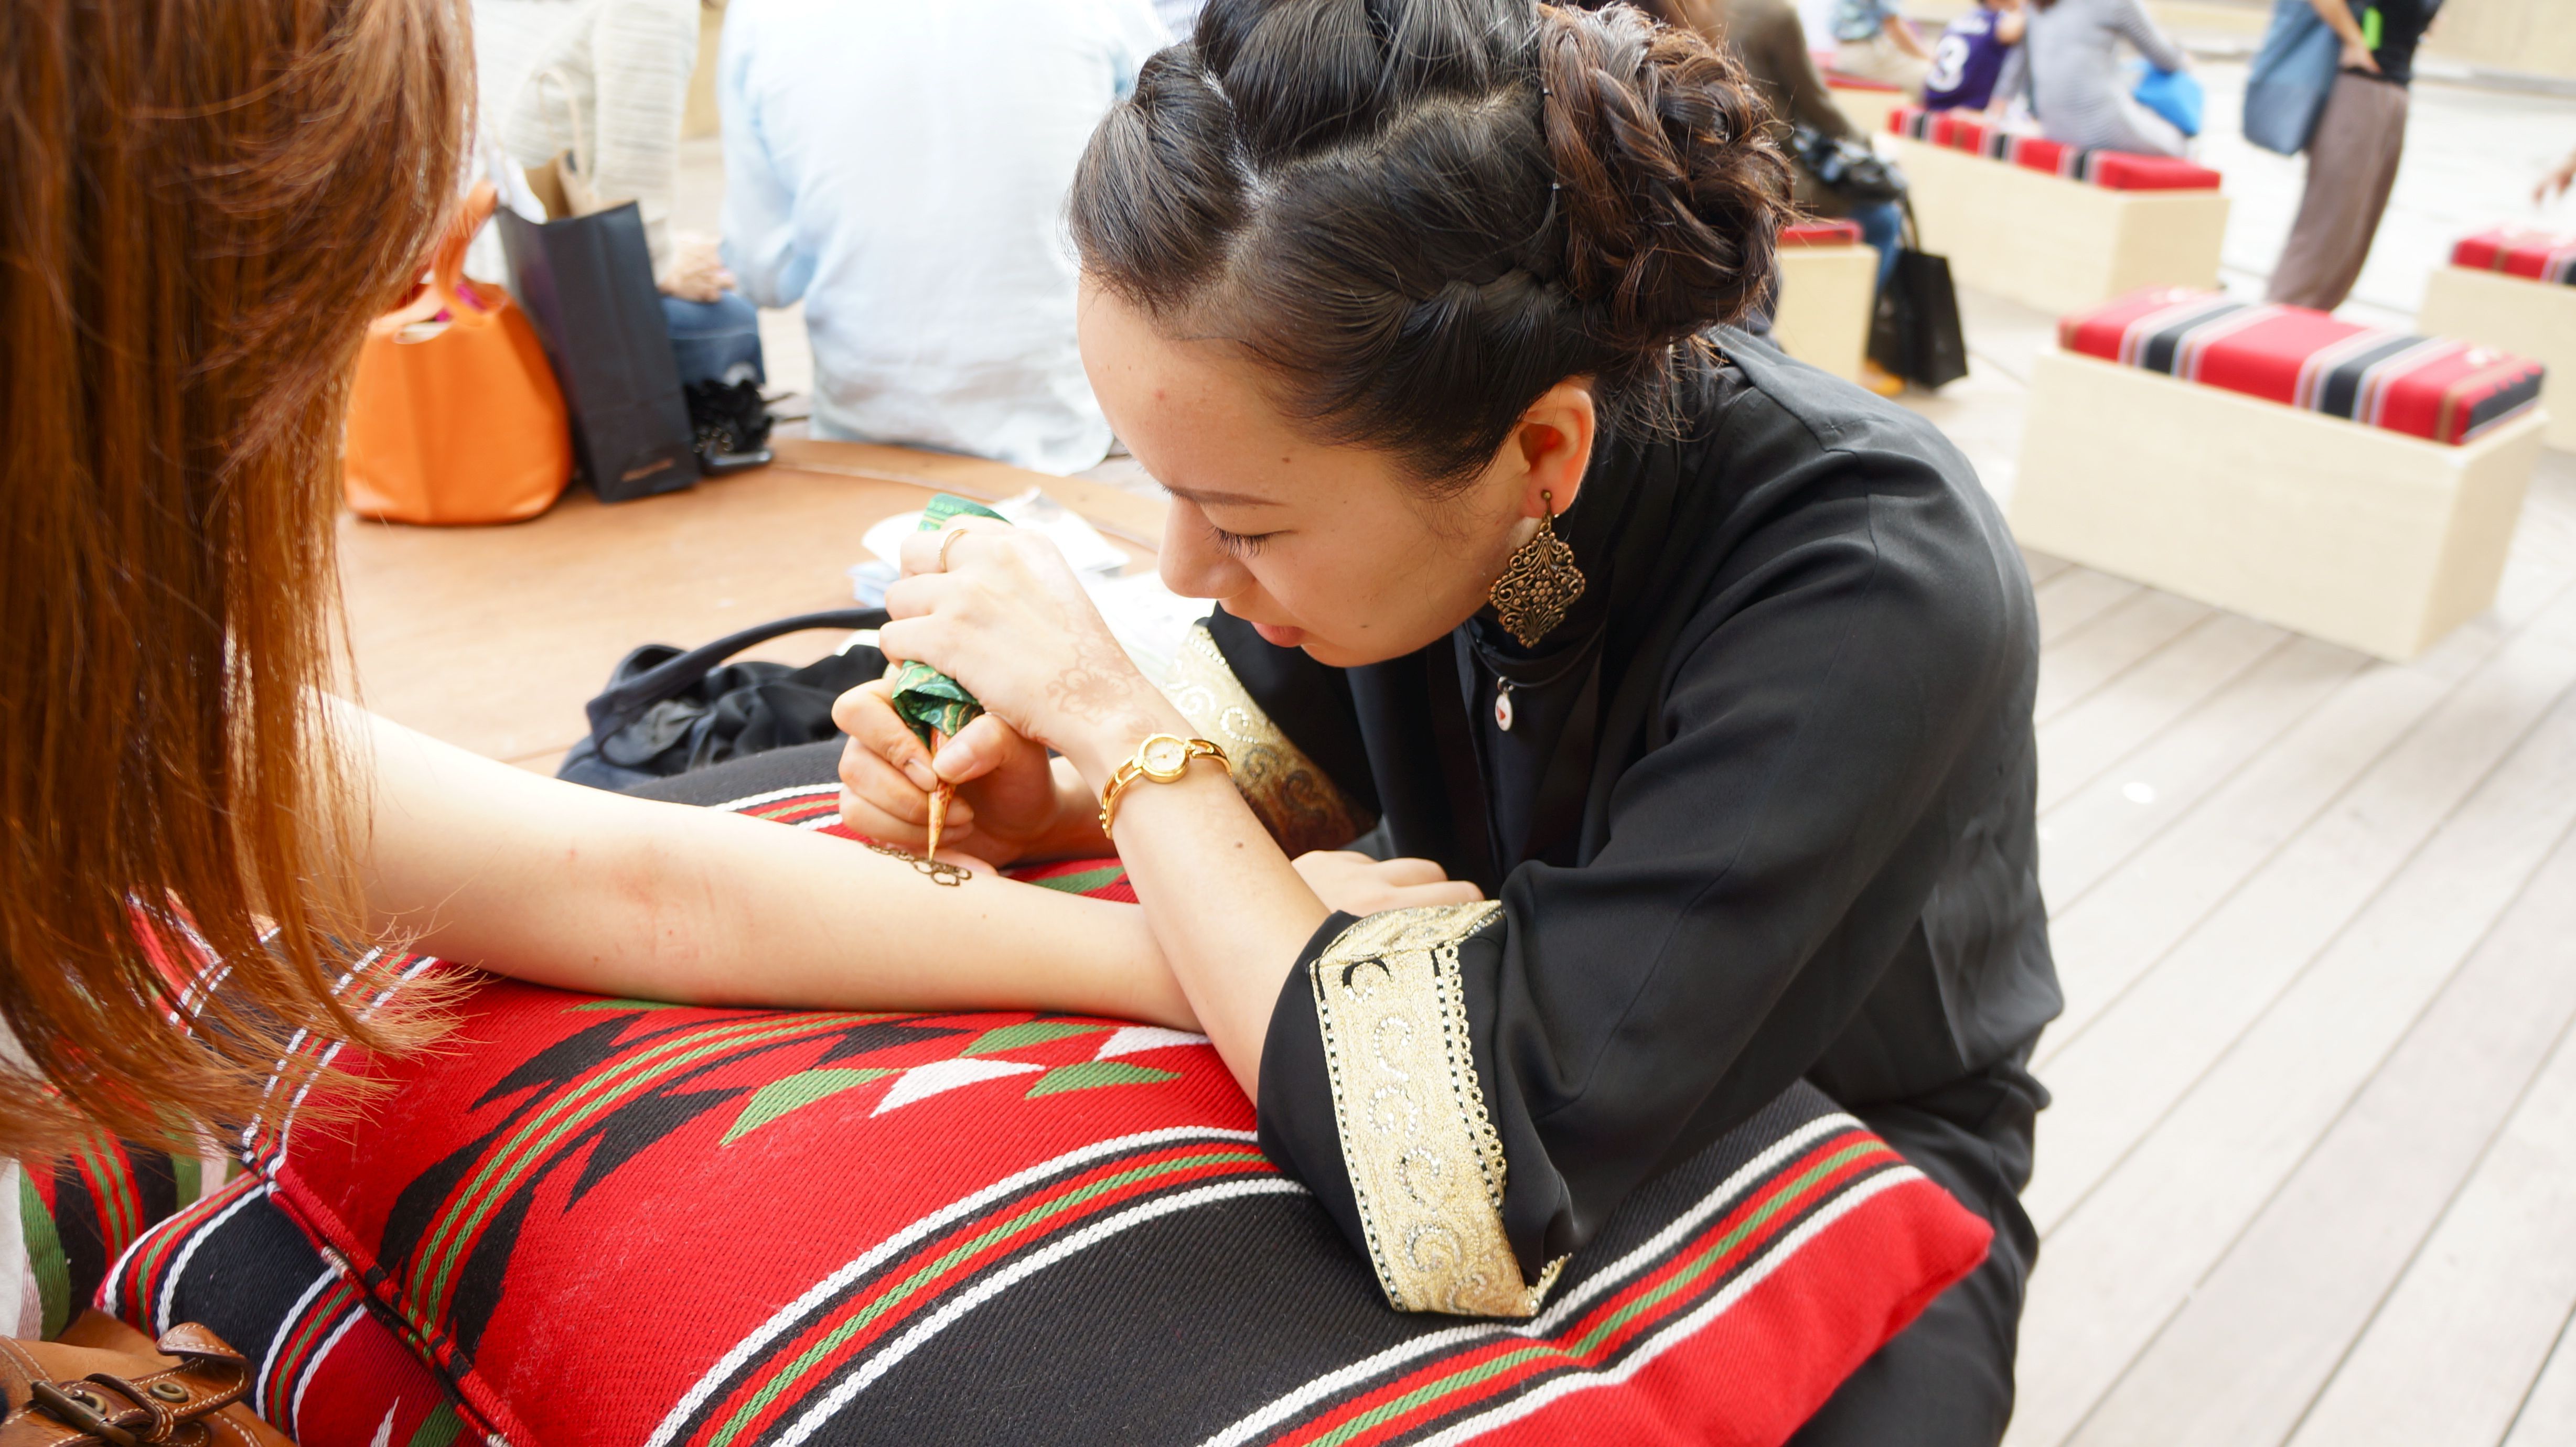 A Japanese woman draws a design on another woman's forearm during Ferjaan in Tokyo for the Qatar-Japan 2012 Year of Culture.